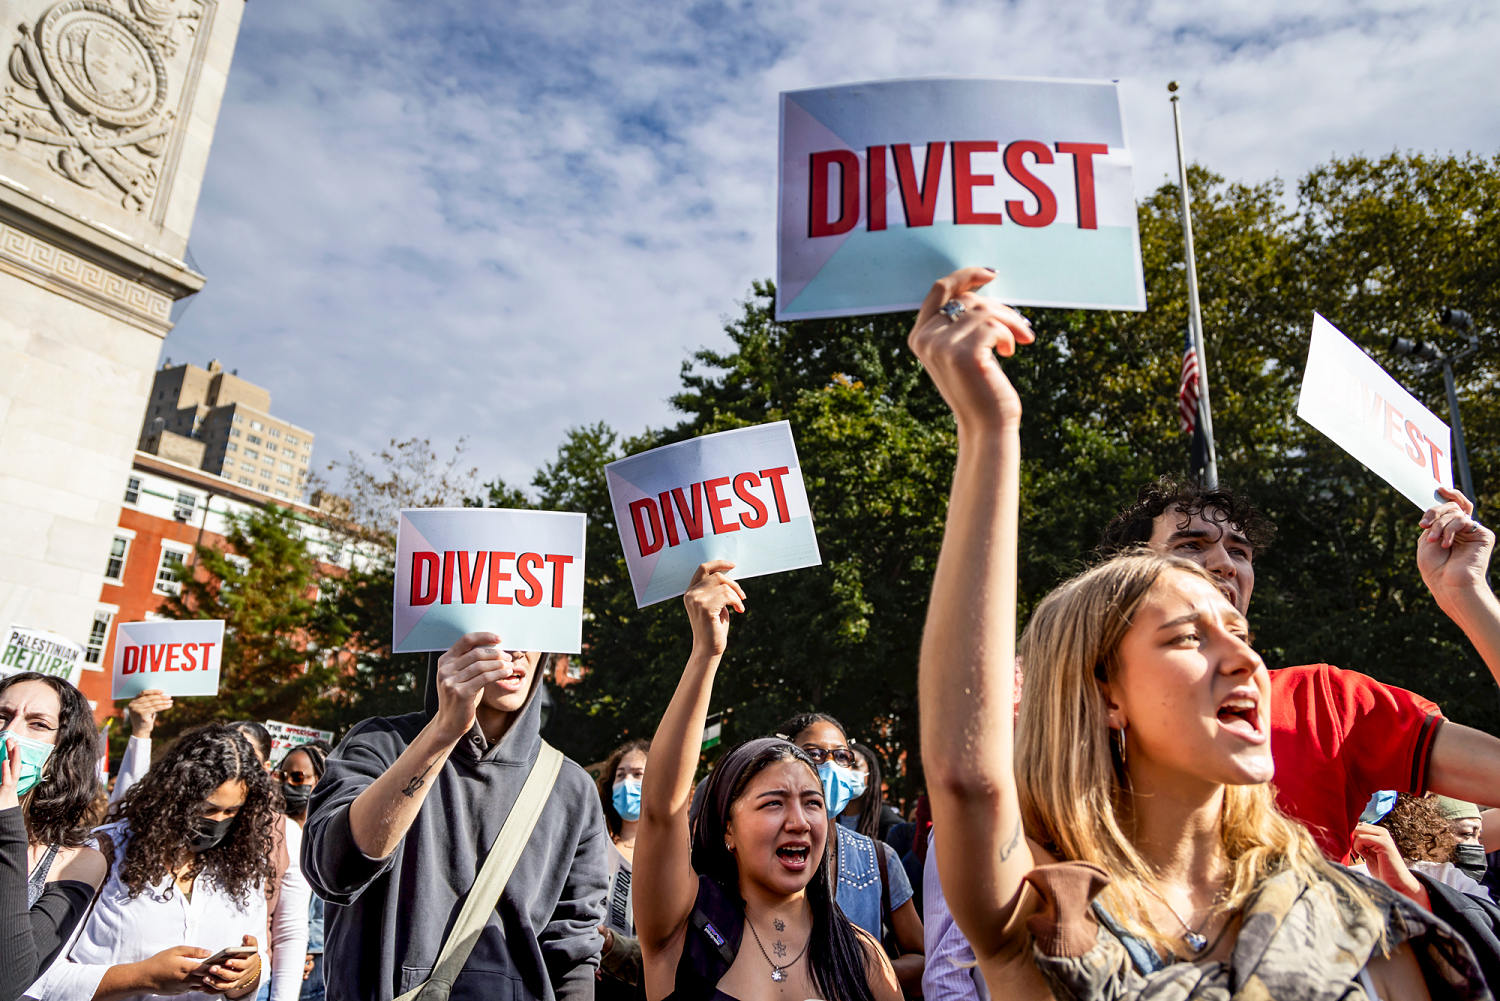 College protesters want their schools to divest from ties to Israel. Here's what that means.